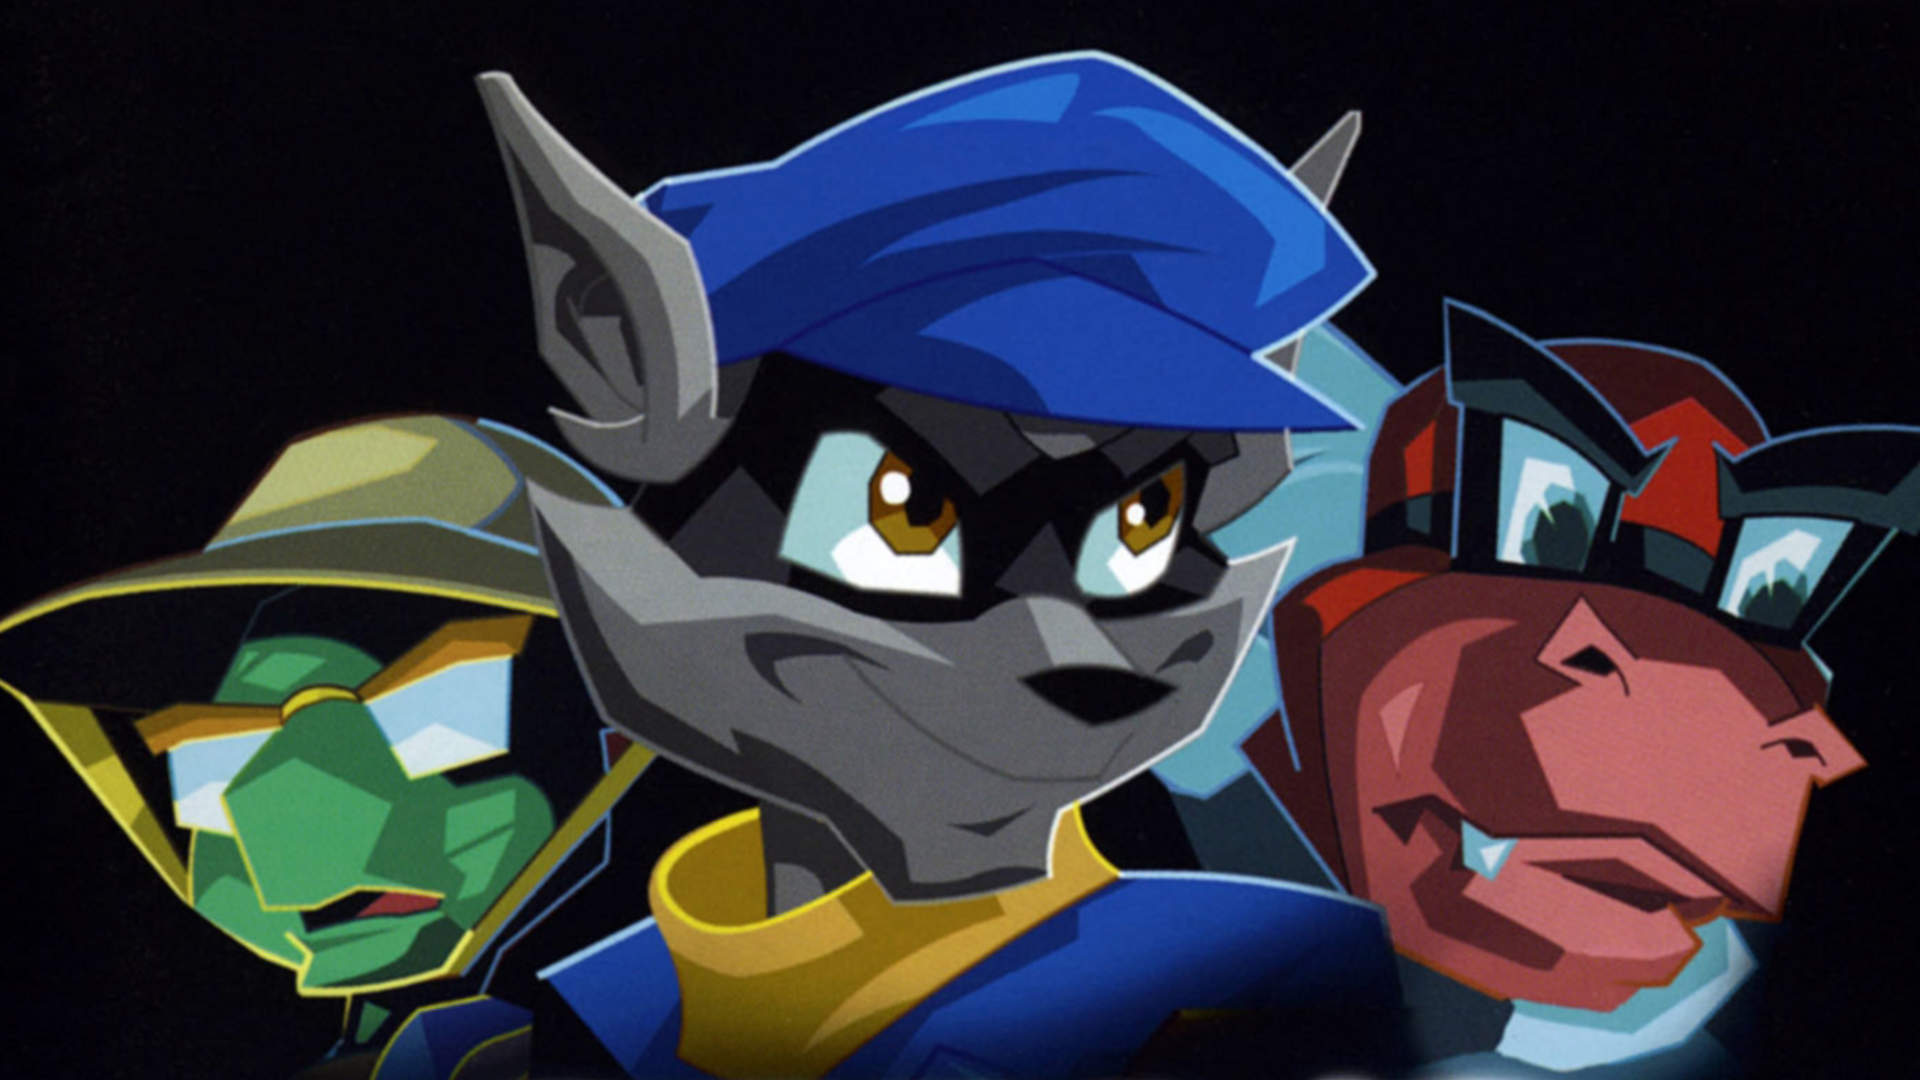 Sly Cooper 5 supposedly in development